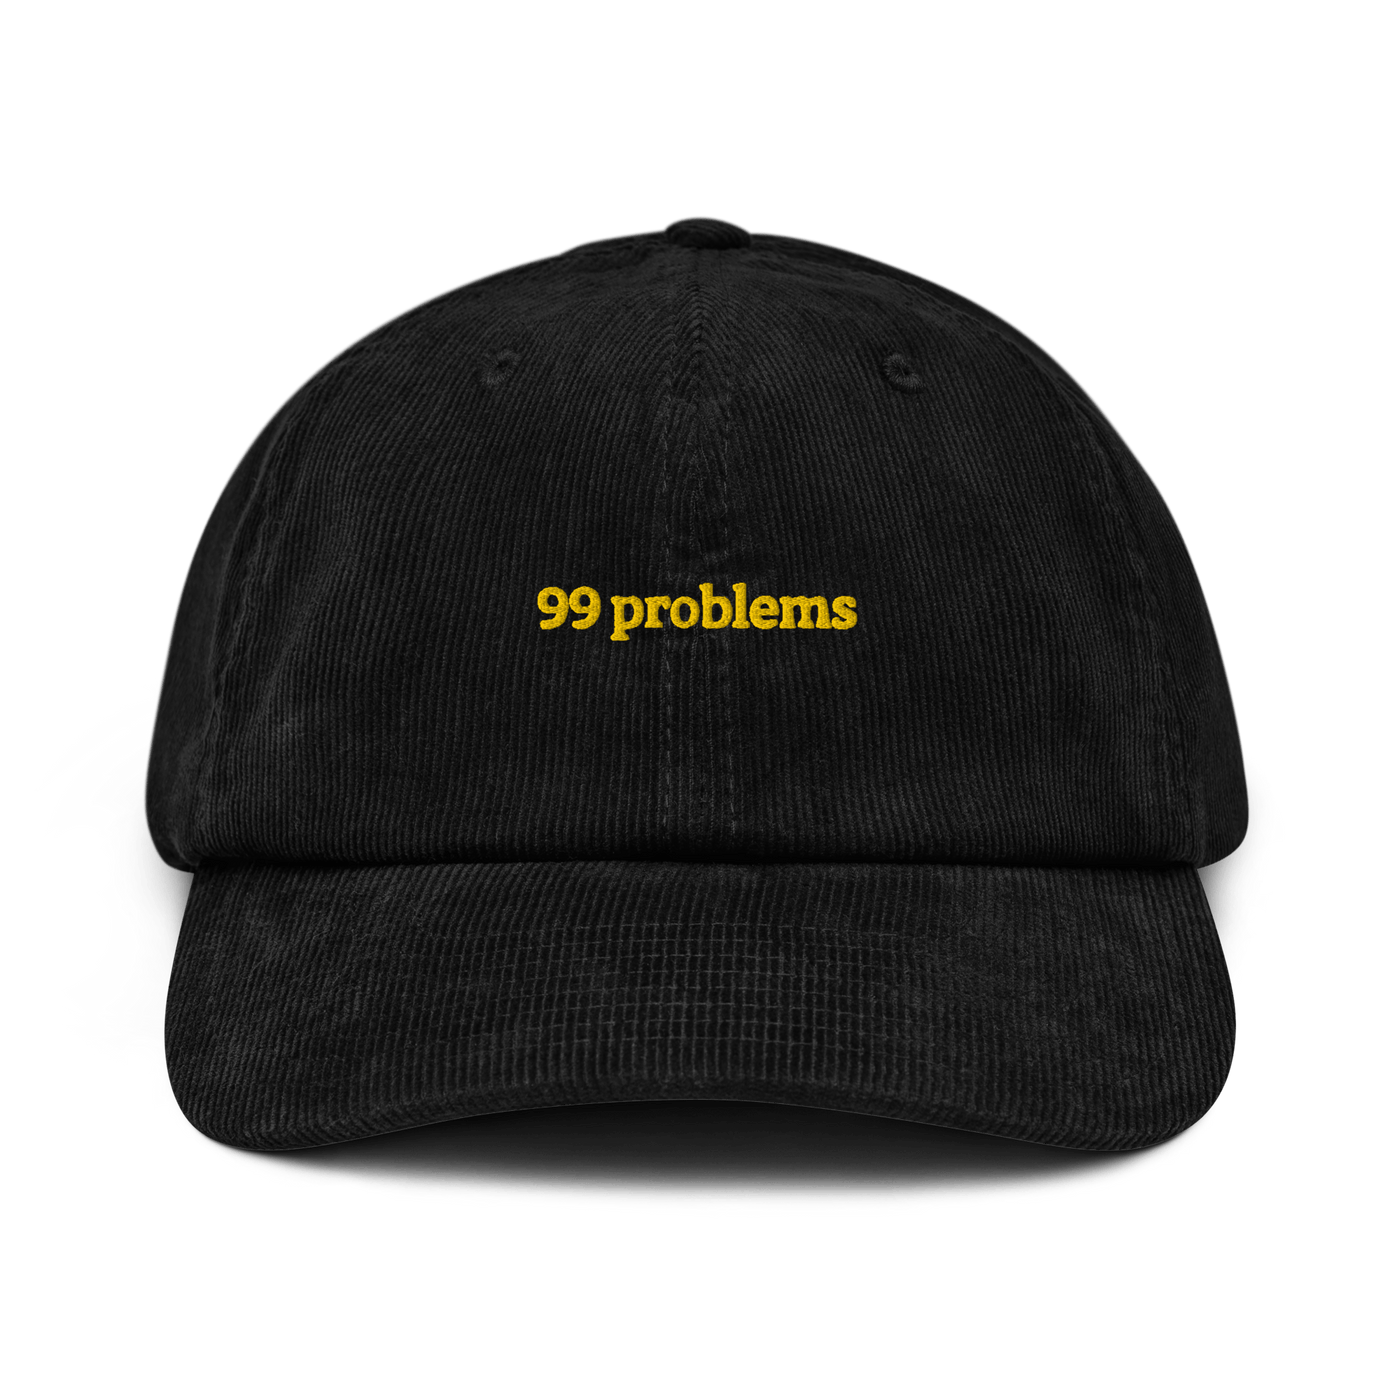 99 problems Corduroy hat - Black - - Just Another Cap Store